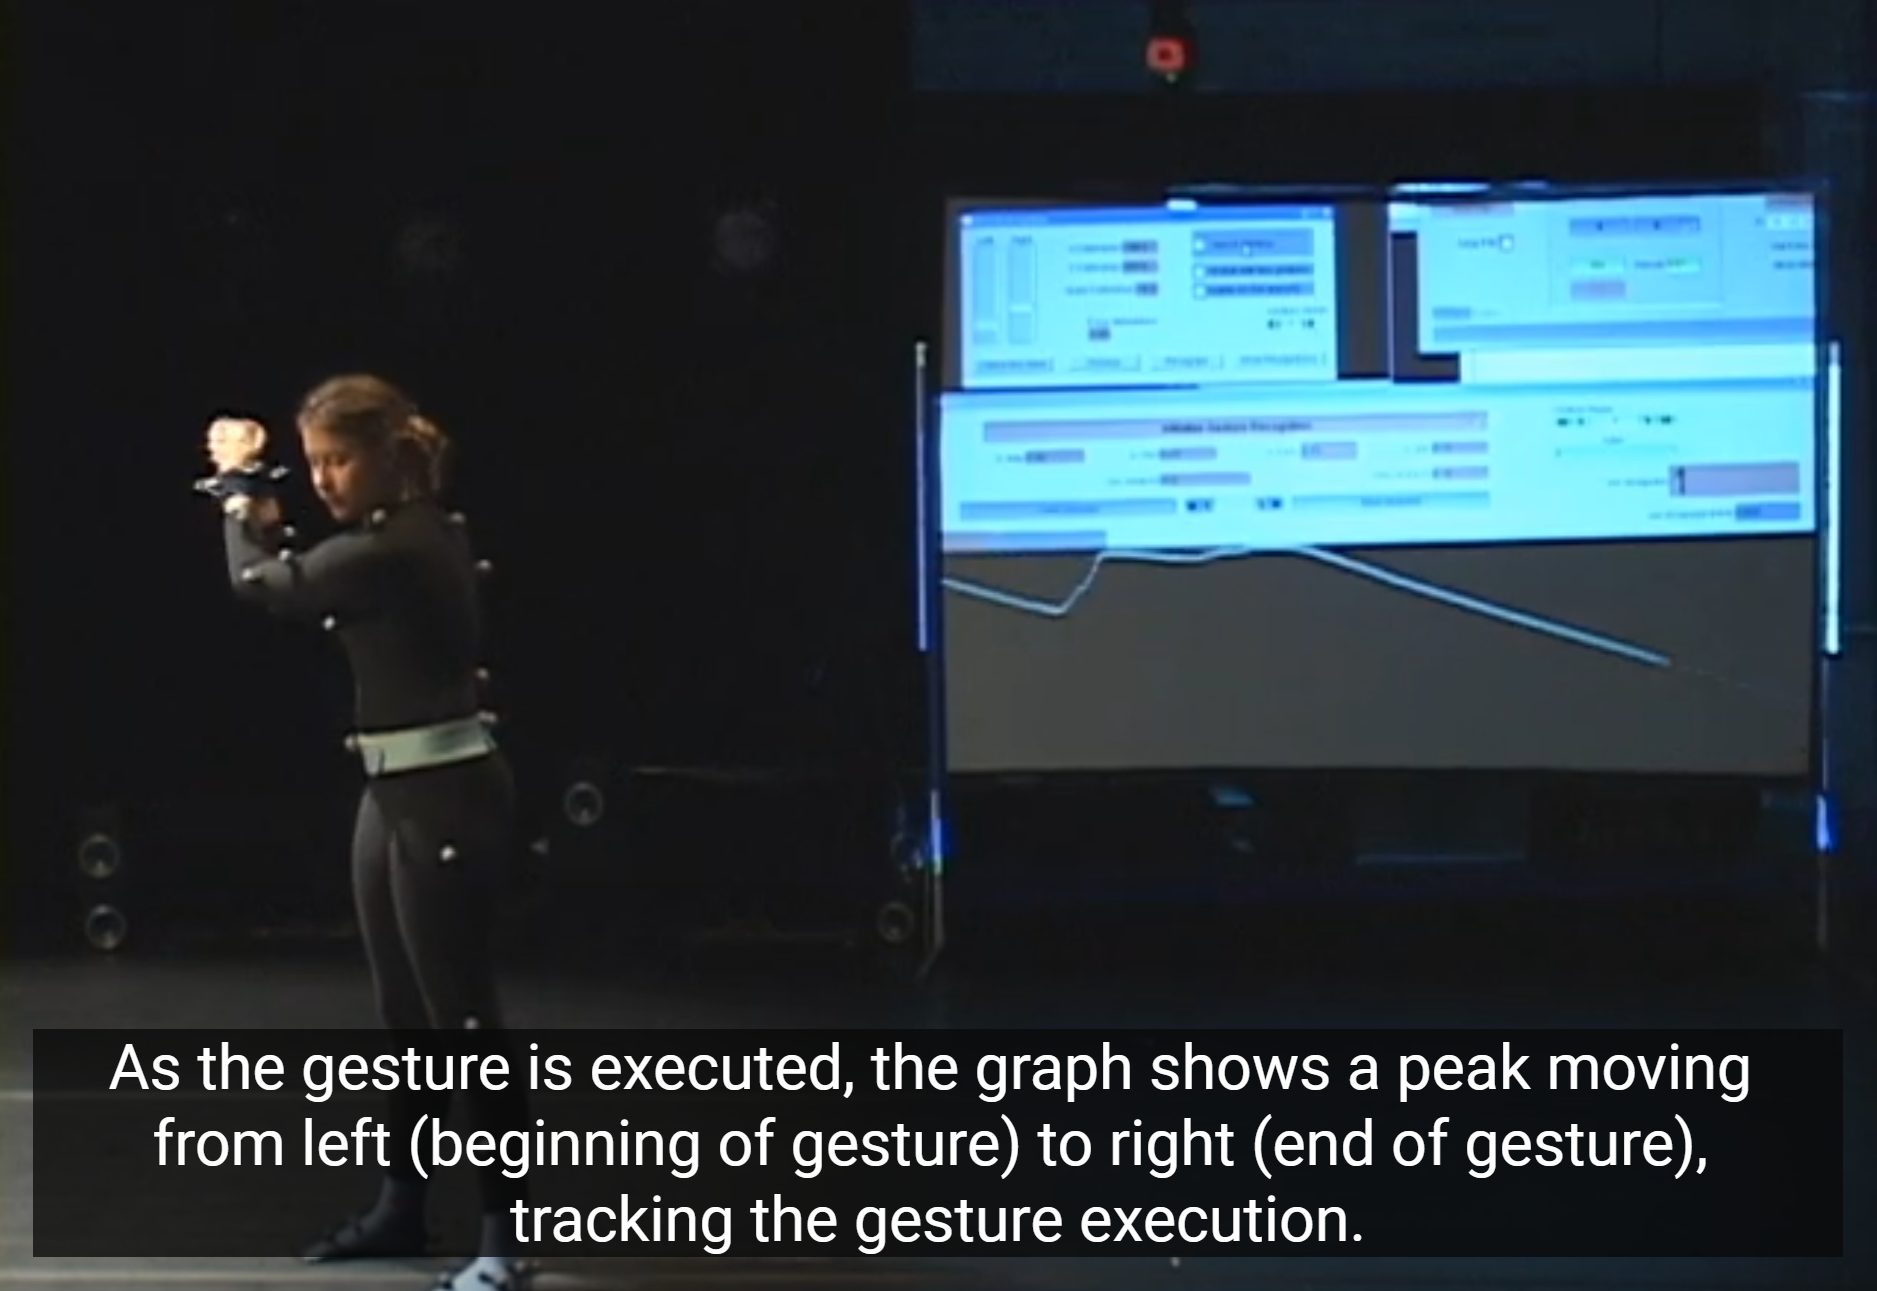 An on-line gesture recogntion app.